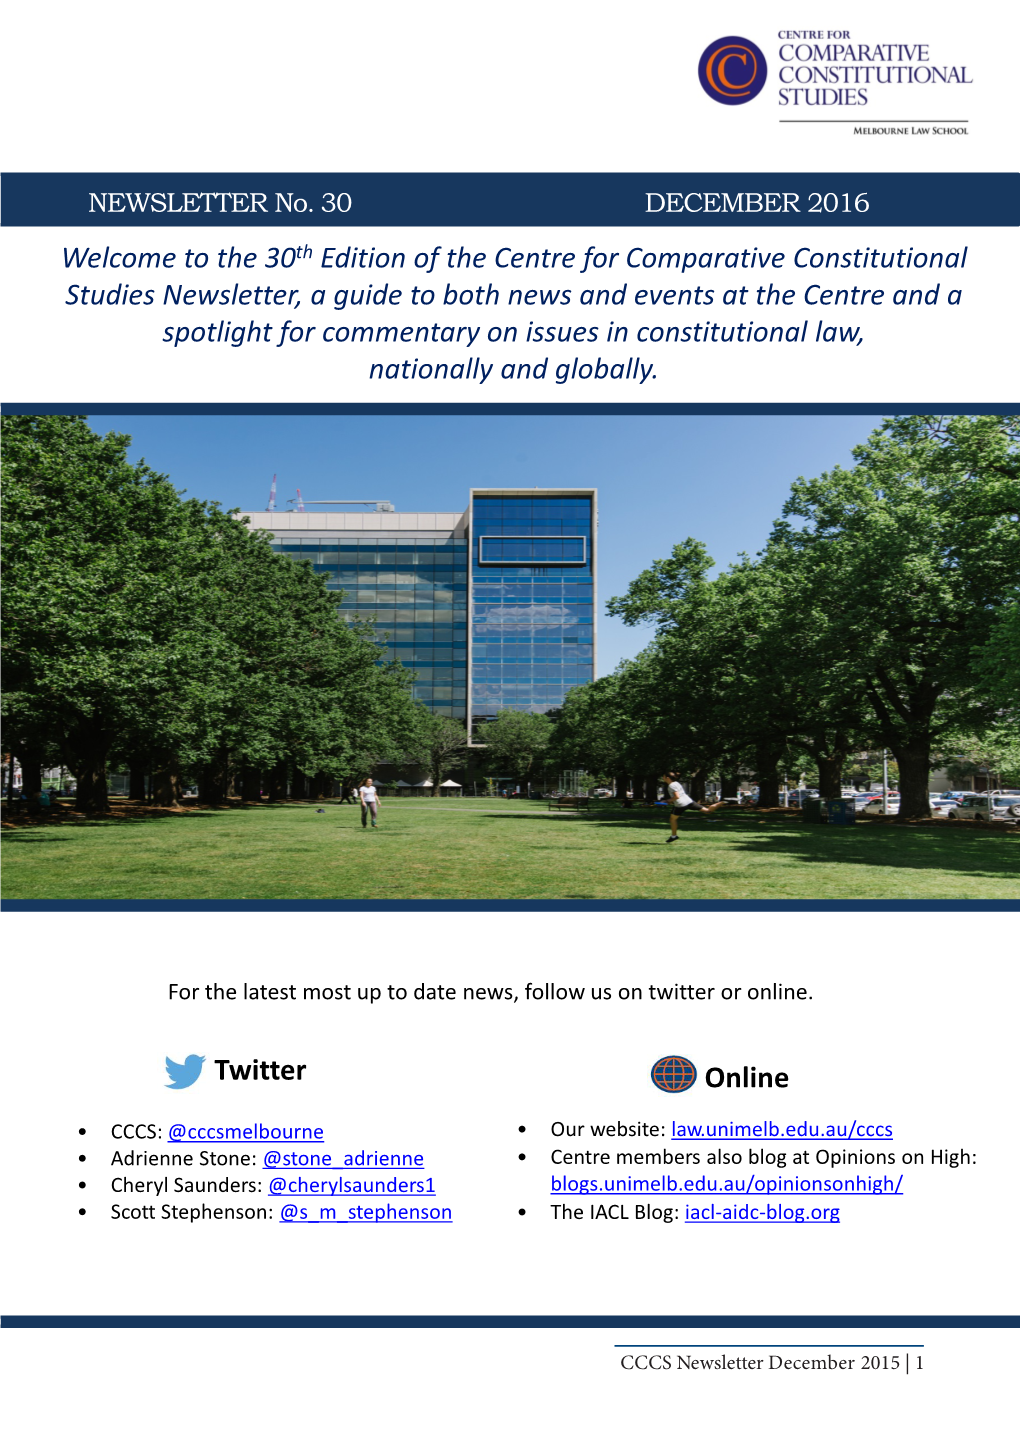 Welcome to the 30Th Edition of the Centre for Comparative Constitutional Studies Newsletter, a Guide to Both News and Events At